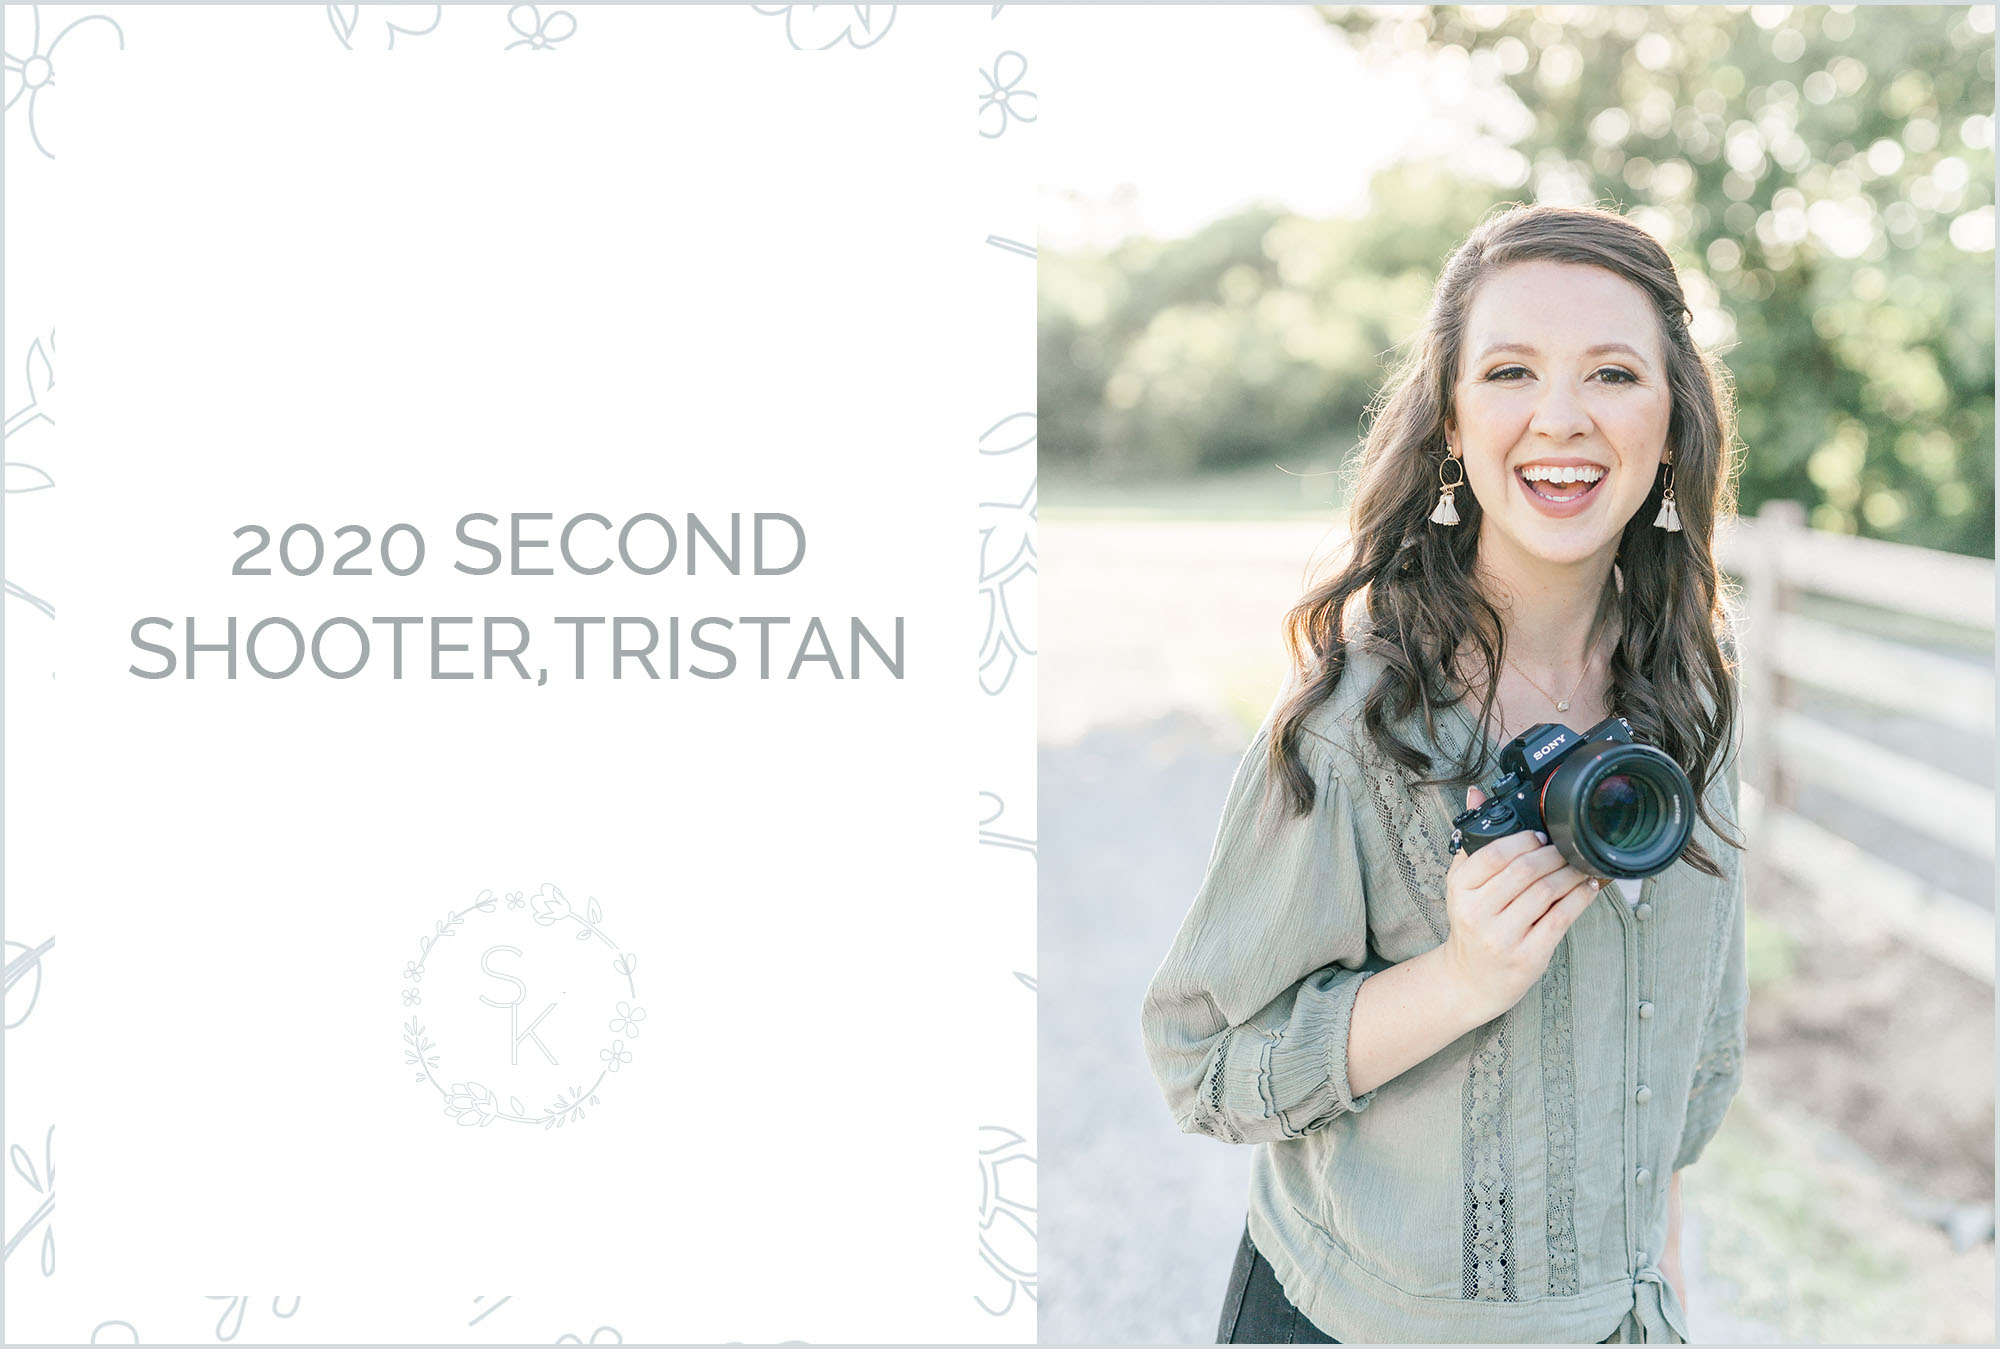 Introducing second shooter Trstan for Stephanie Kase Photography